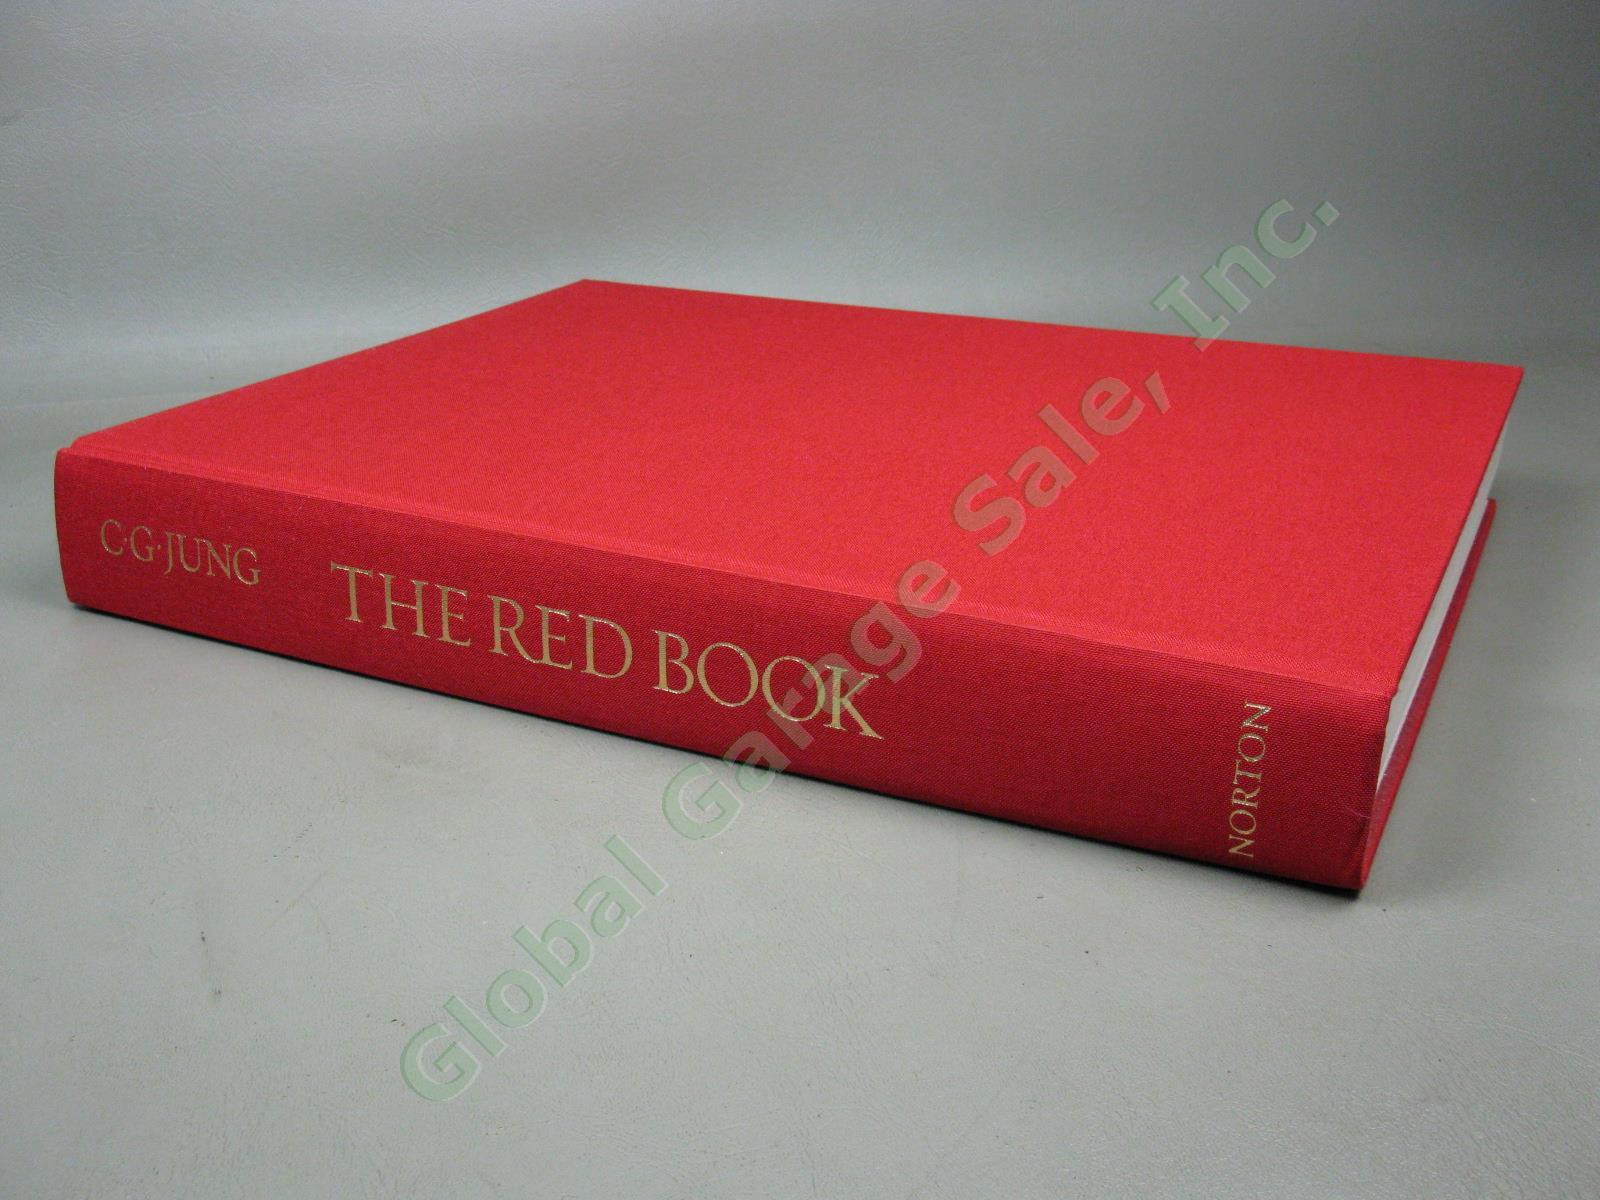 C.G Carl Jung The Red Book Liber Novus 2009 First Edition Hardcover +Dust Jacket 13